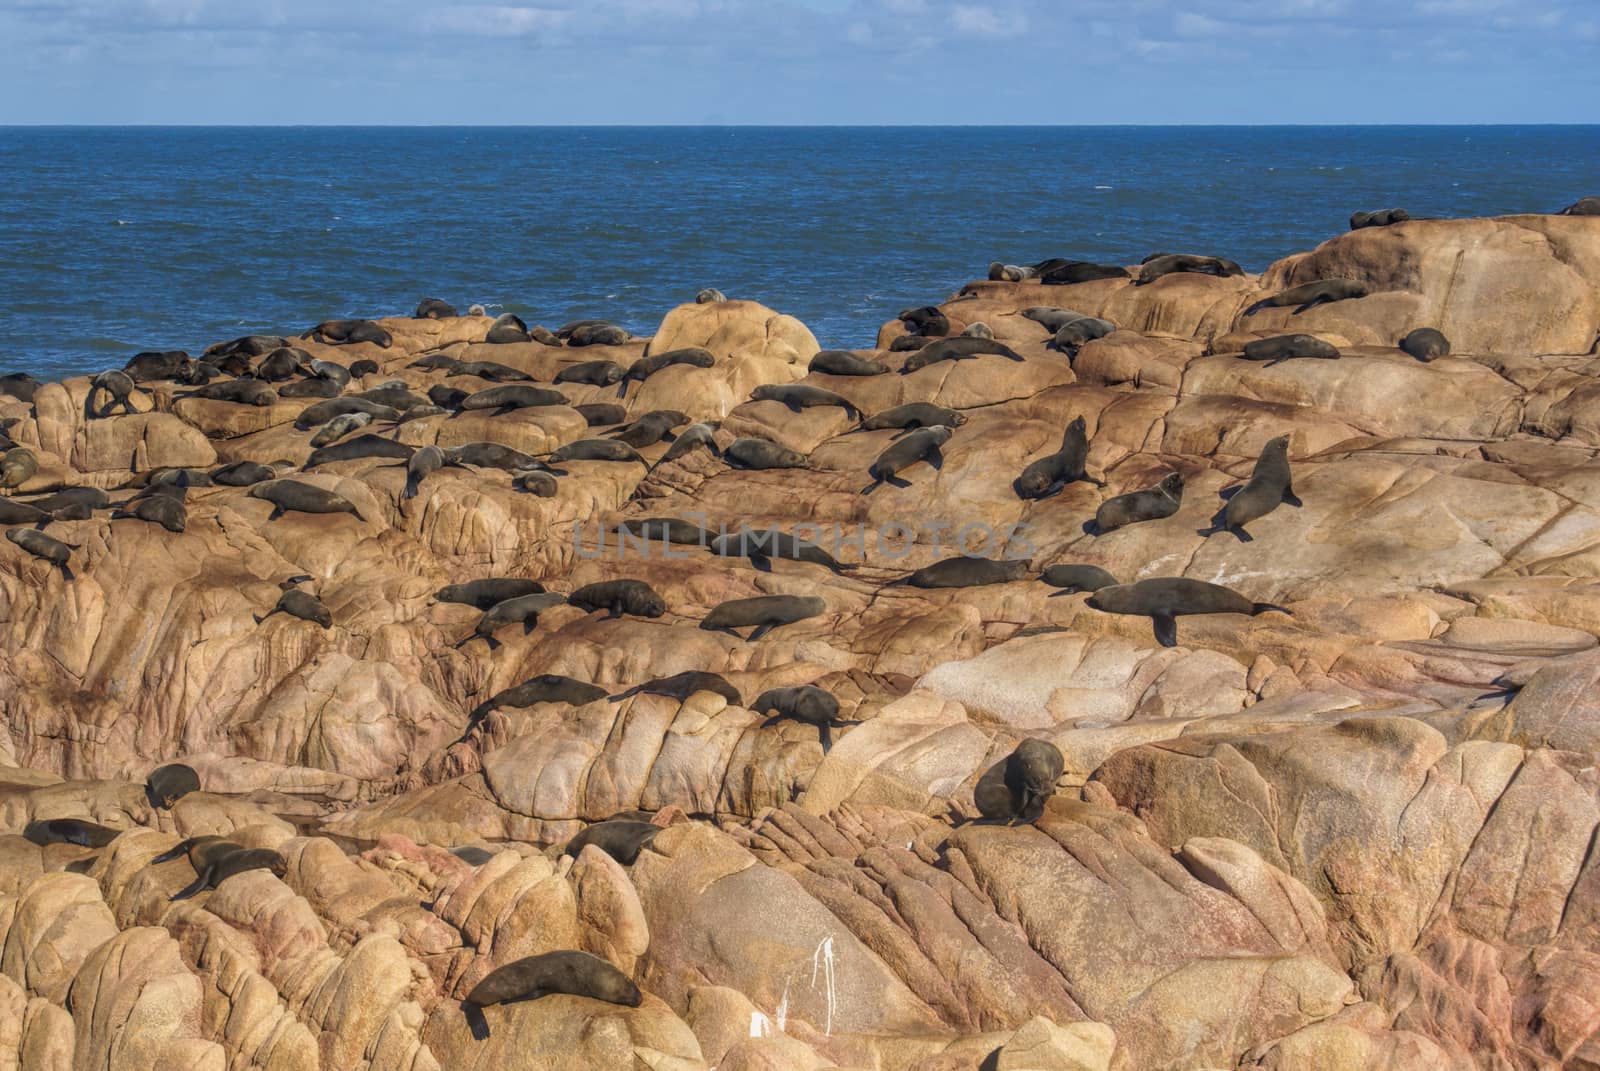 A group of sea lions basking in sunlight on rocks in Cabo Polonio, Uruguay